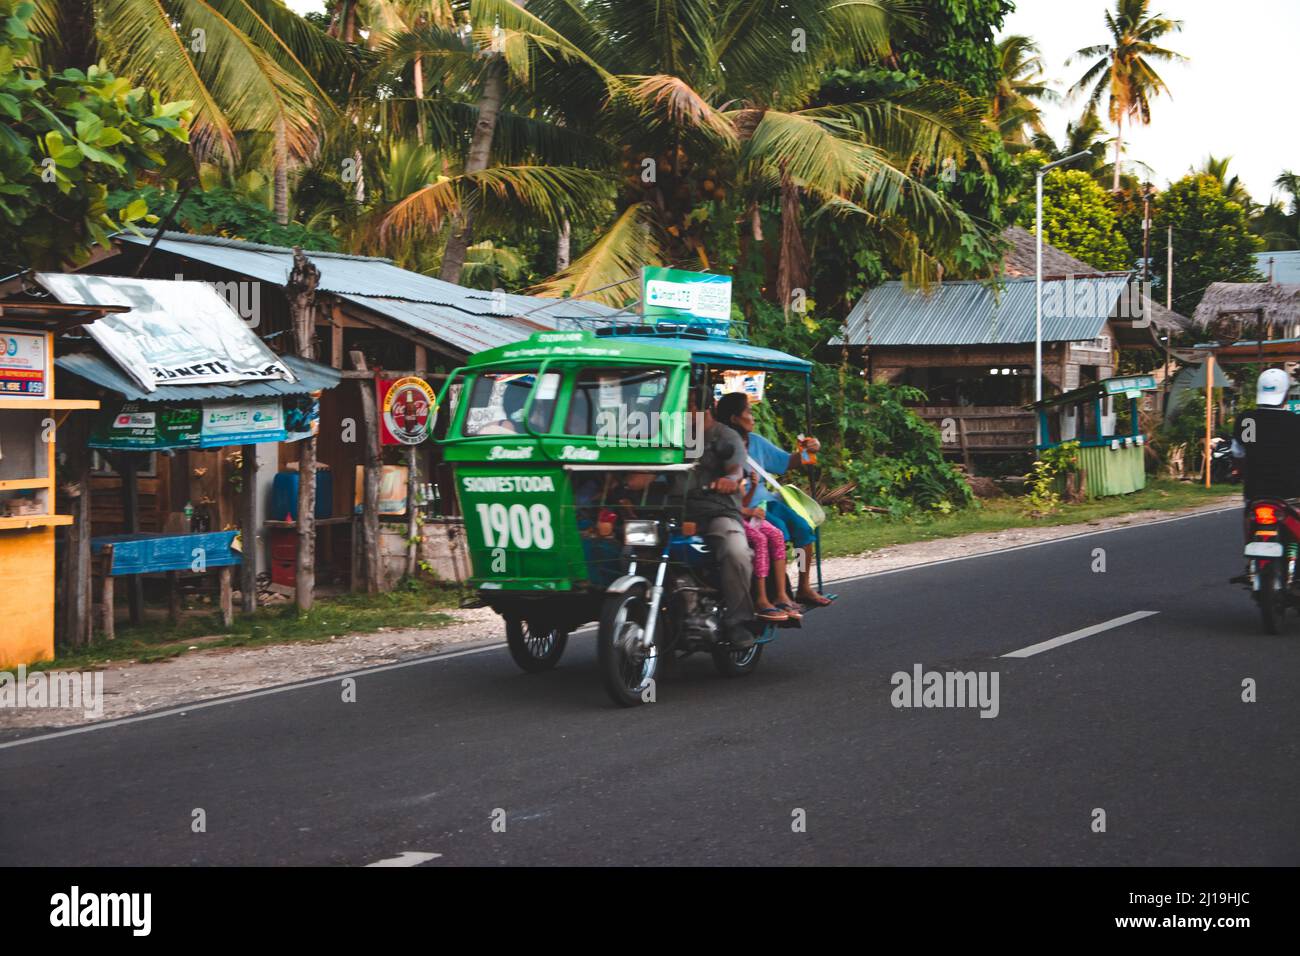 Siquijor Island, Philippines - Decenber 29, 2019: tricycle in front of a simple gas station in the Philippines Stock Photo